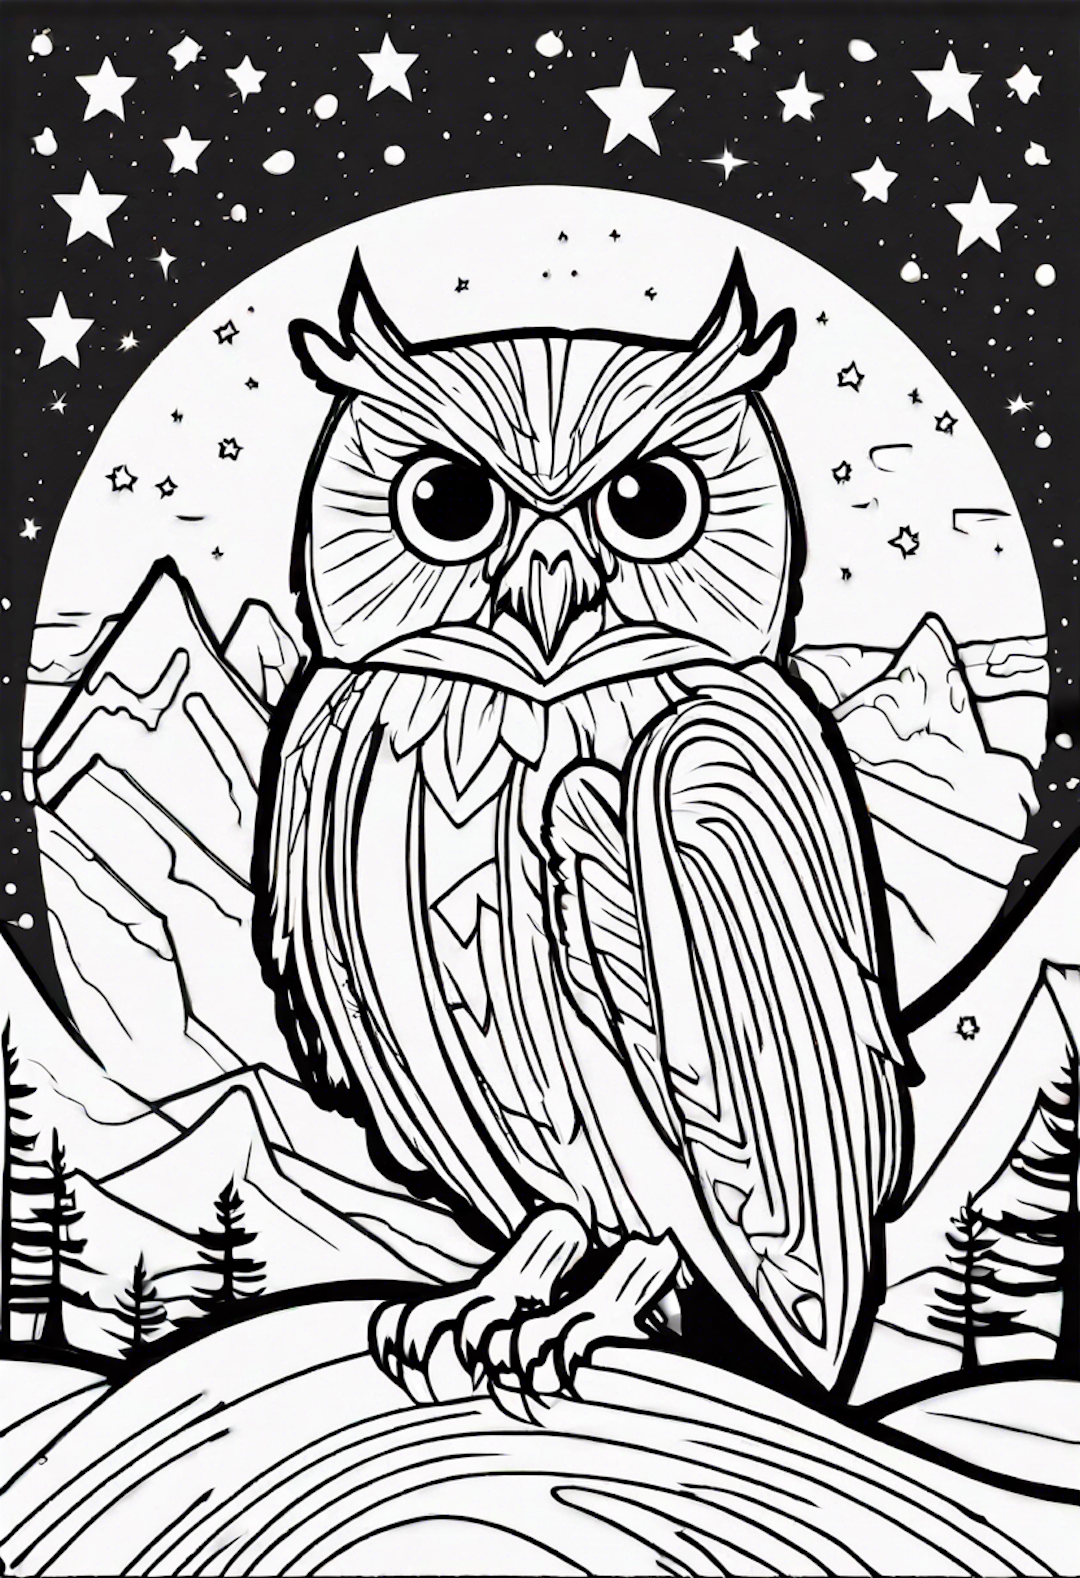 A Surprised Star Stargazing With A Wise Owl